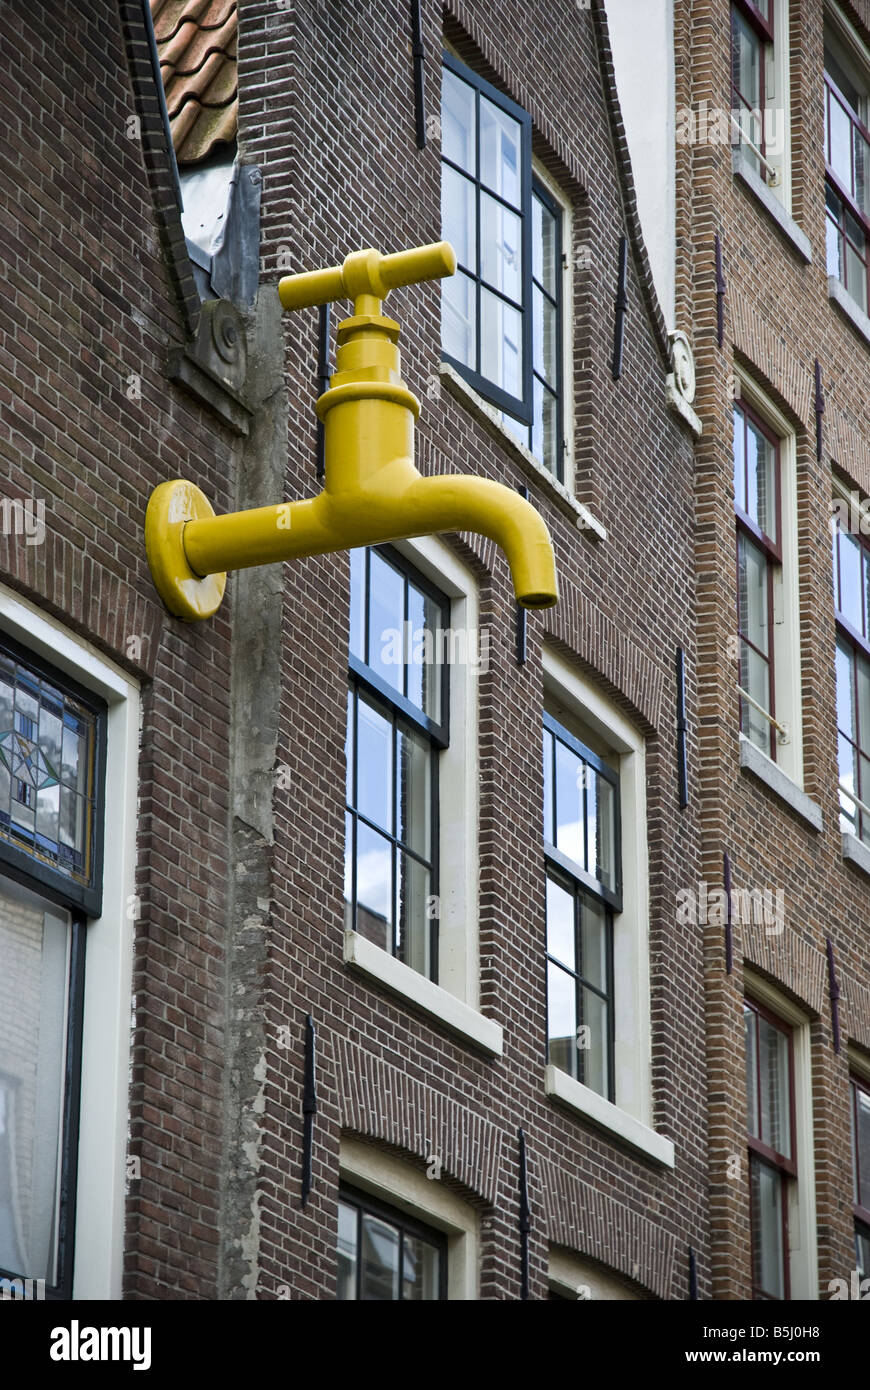 A large yellow faucet art installation protrudes from a building in Amsterdam. Stock Photo